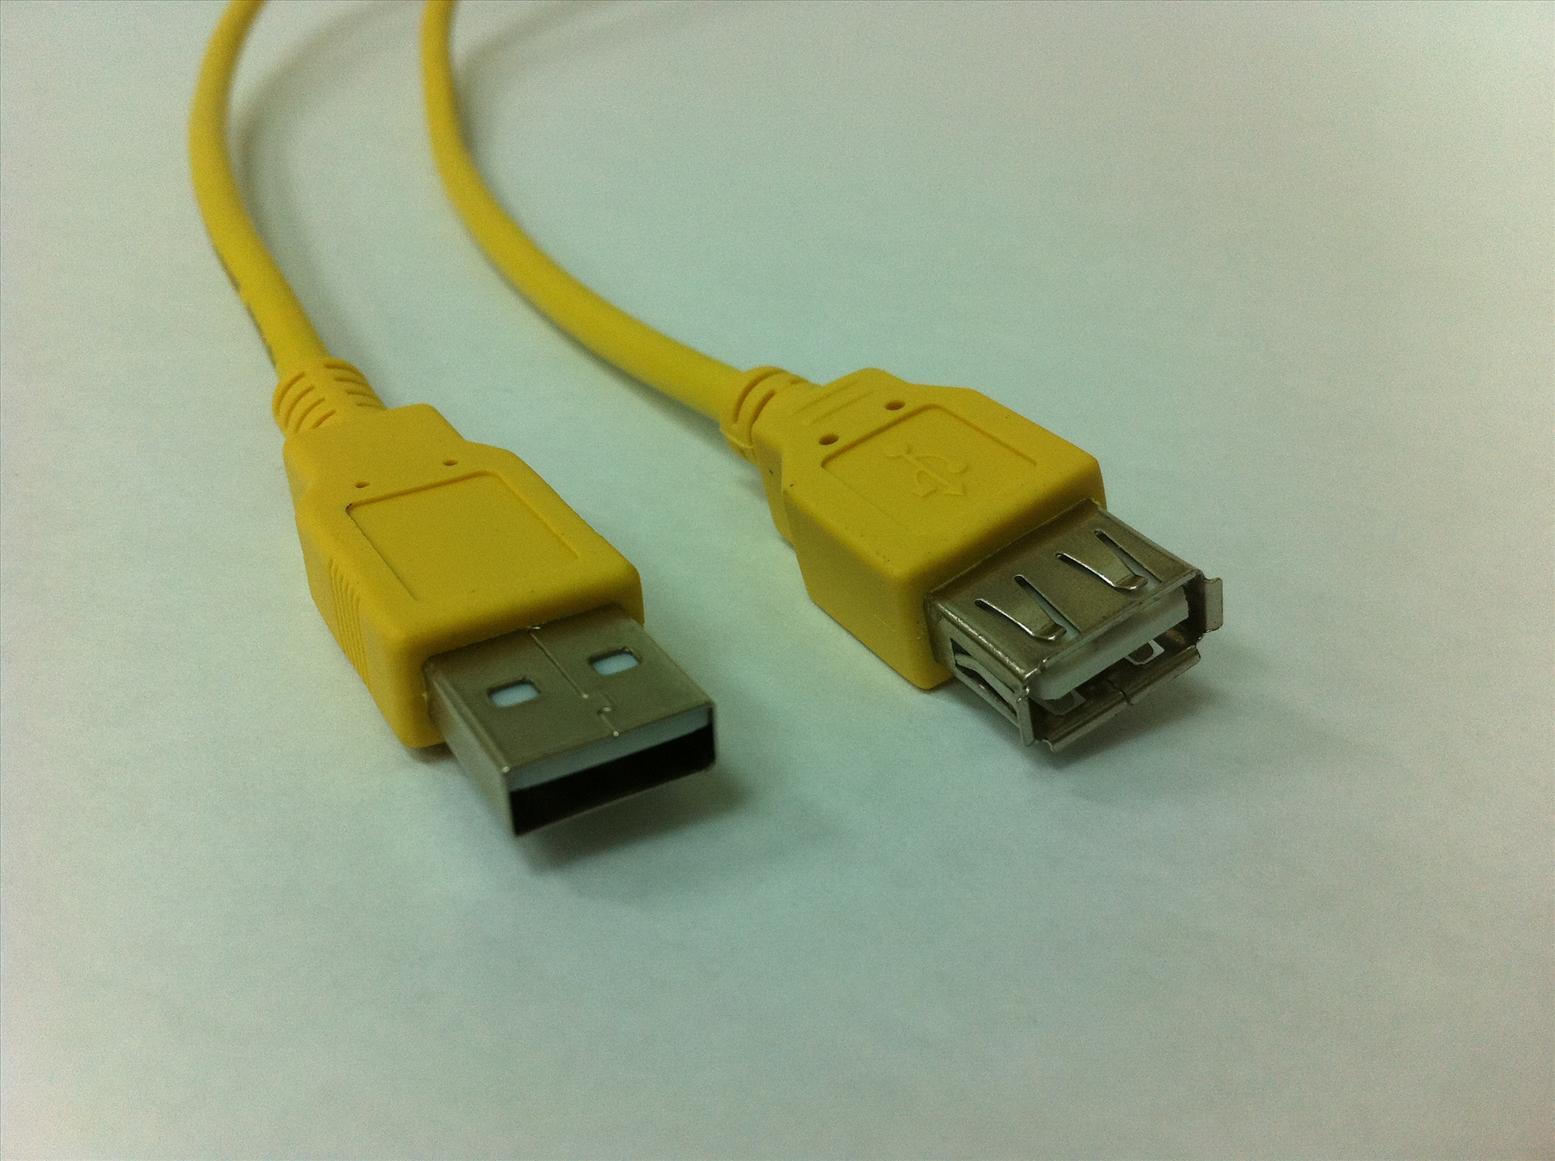 SIEMAX 3 Meter USB 2.0 High Speed Extension Cable